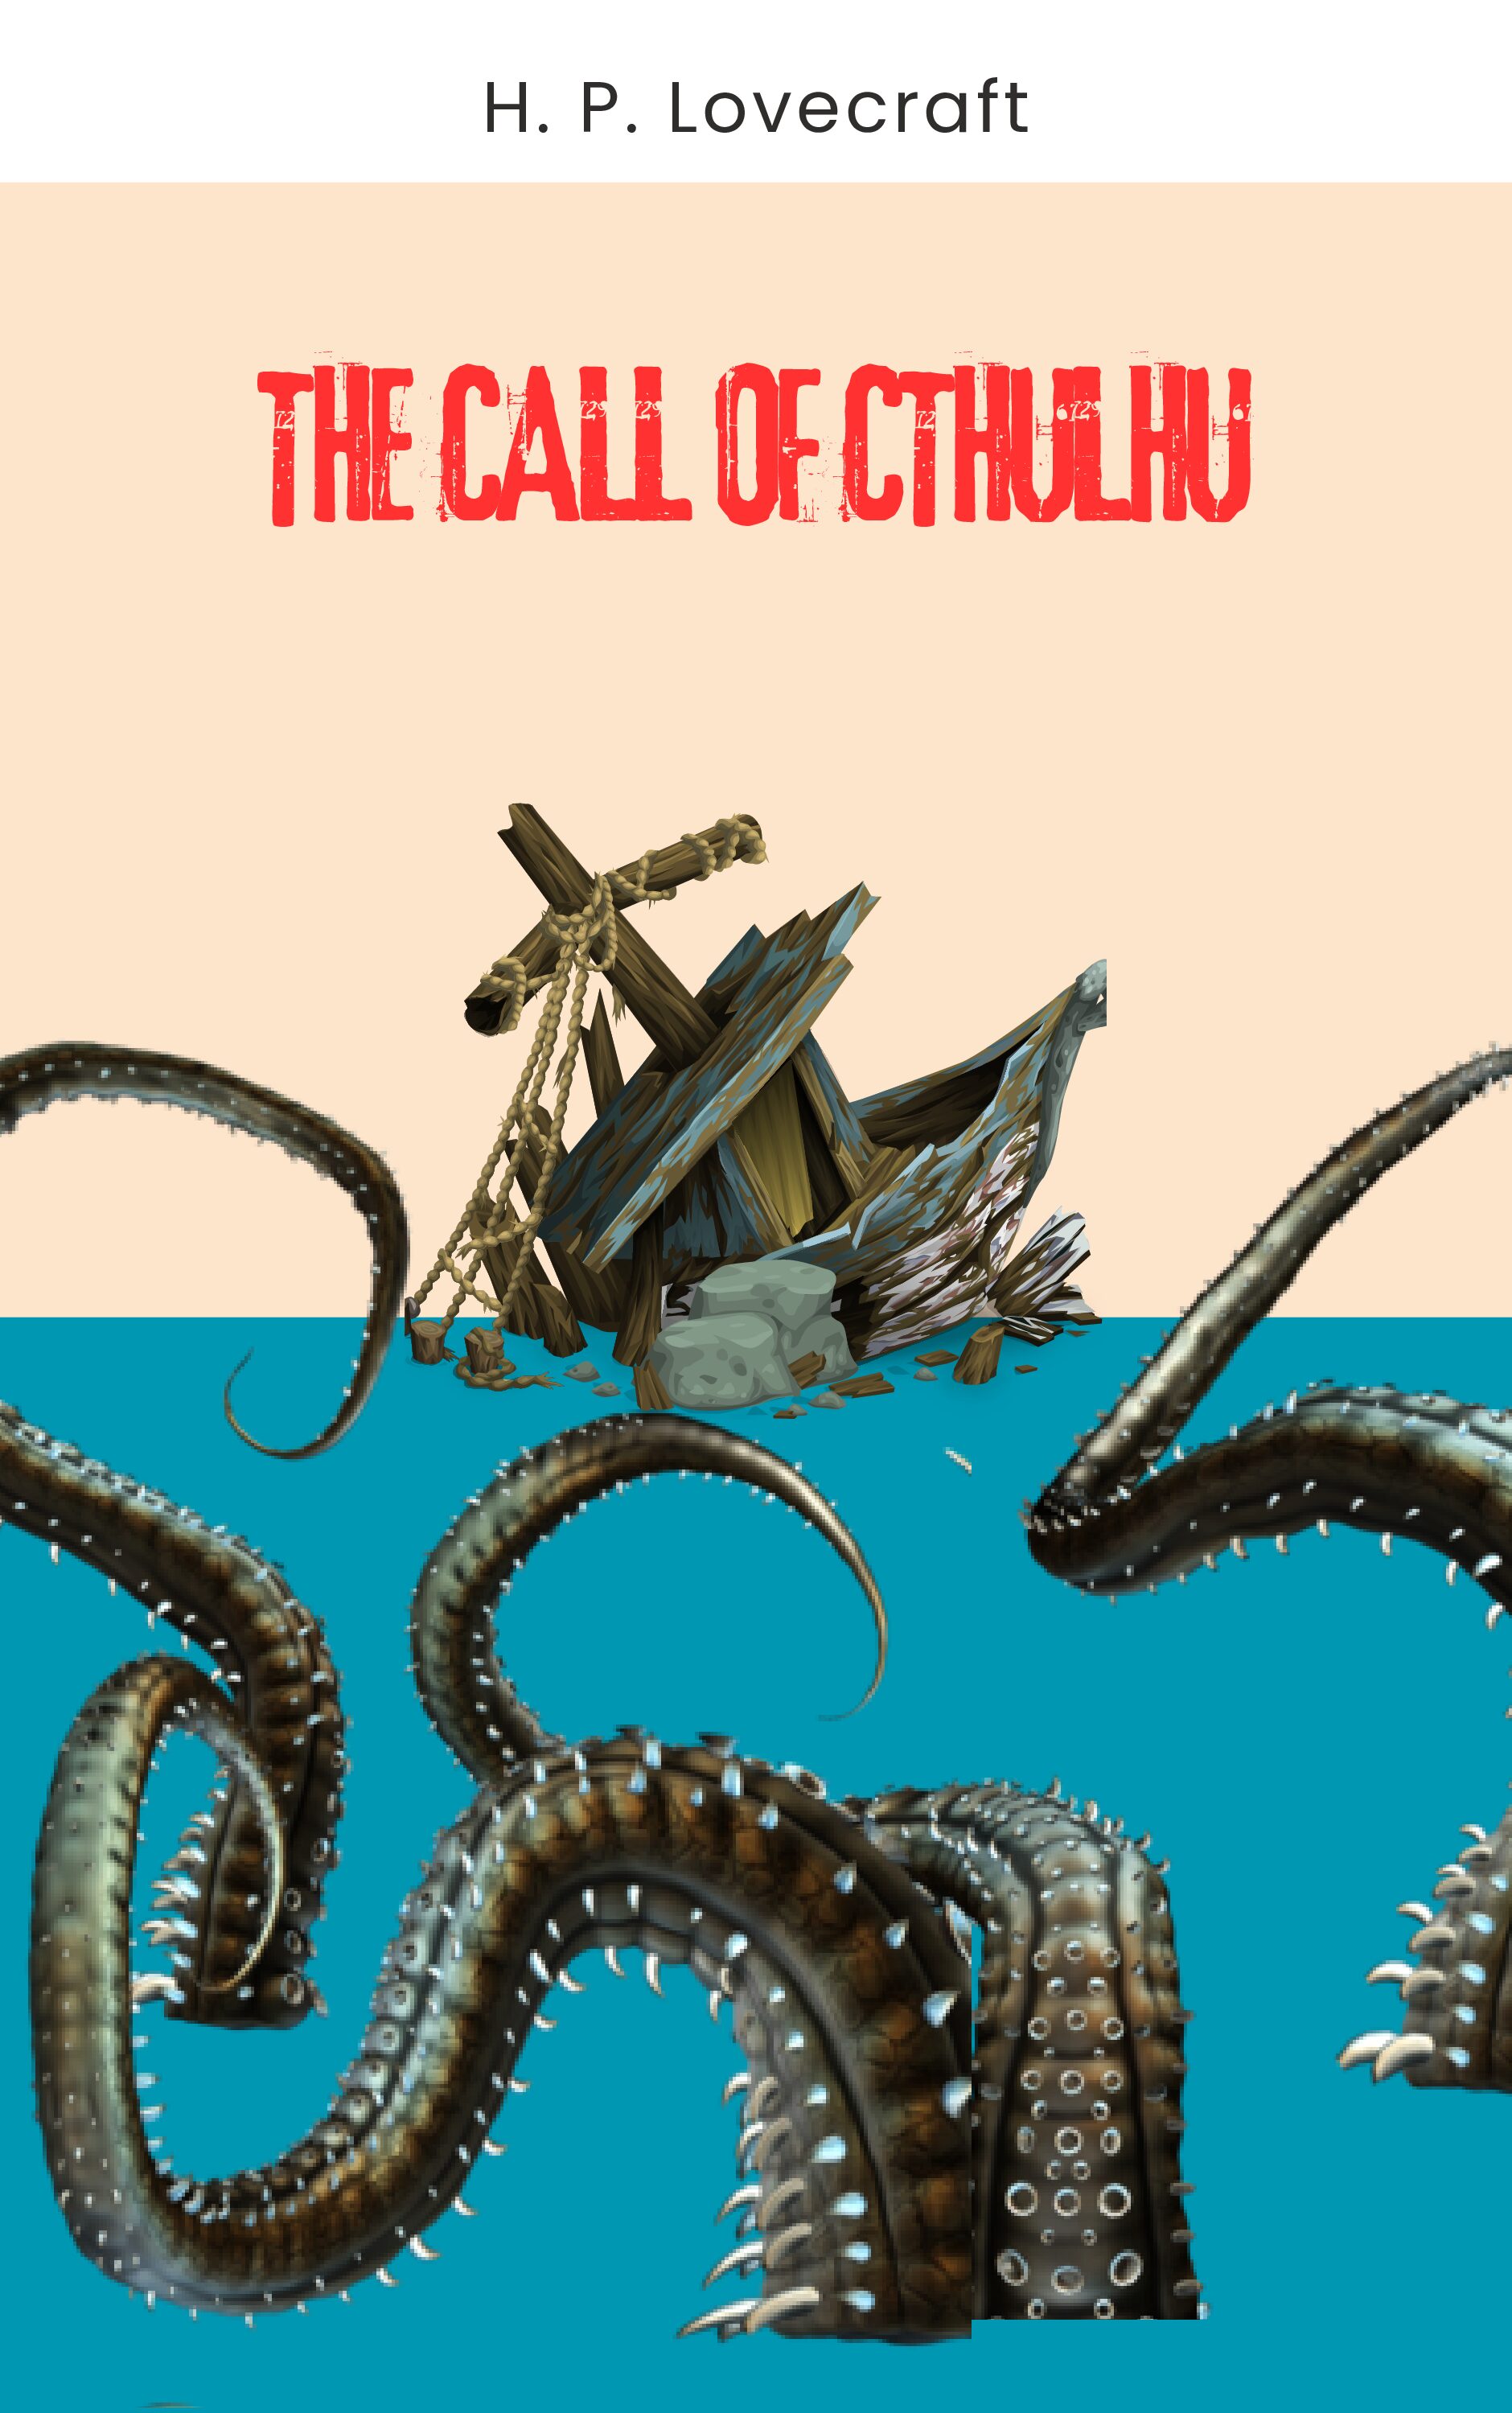 Book Cover: The call of Cthulhu